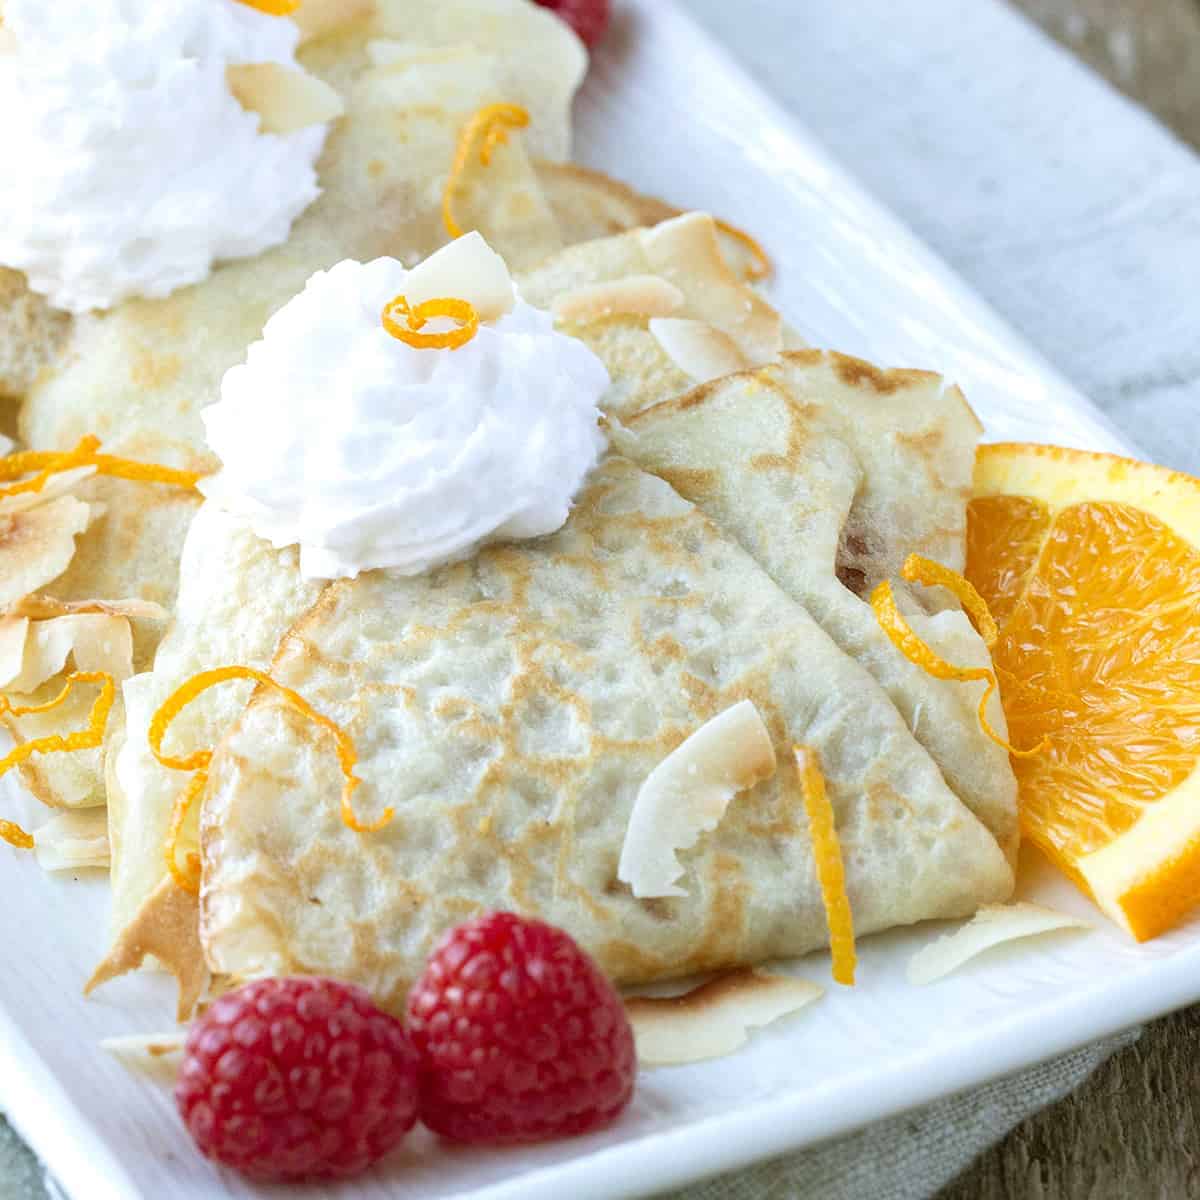 folded crepes on a white rectangular platter, garnished with raspberries, orange slices, and whipped cream.